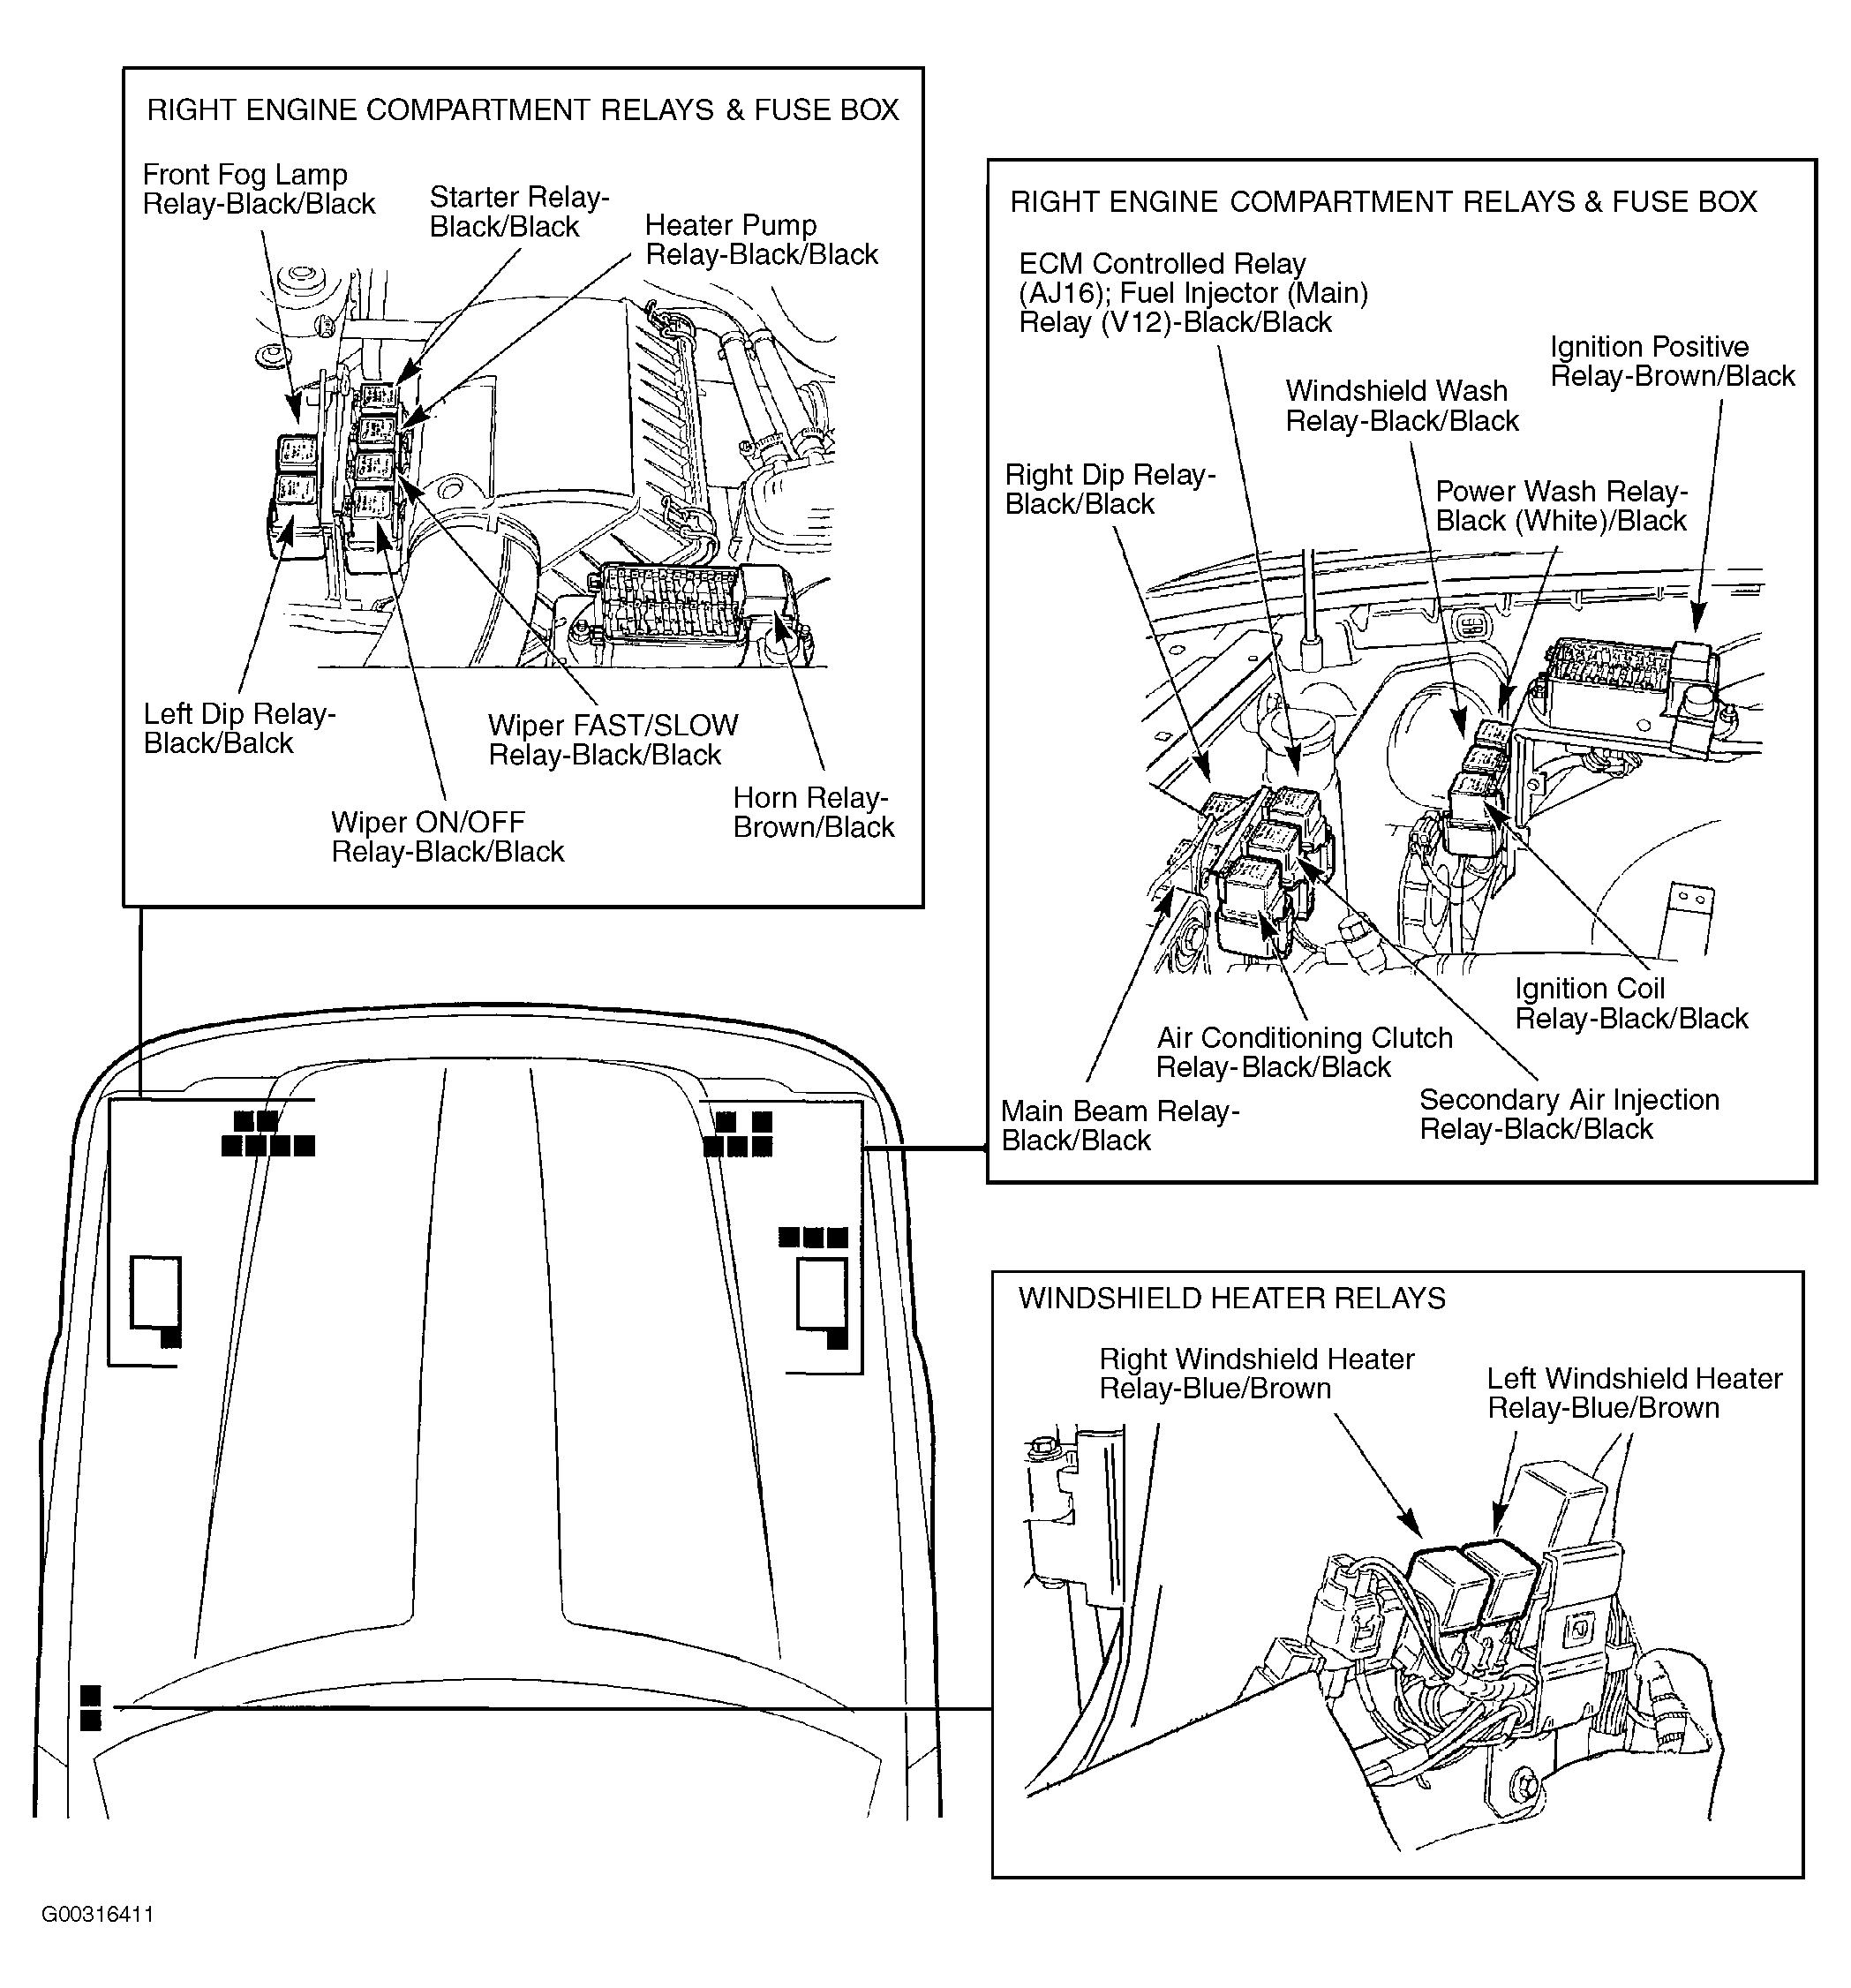 Jaguar XJ6 1997 - Component Locations -  Identifying Engine Compartment Fuse/Relay Locations